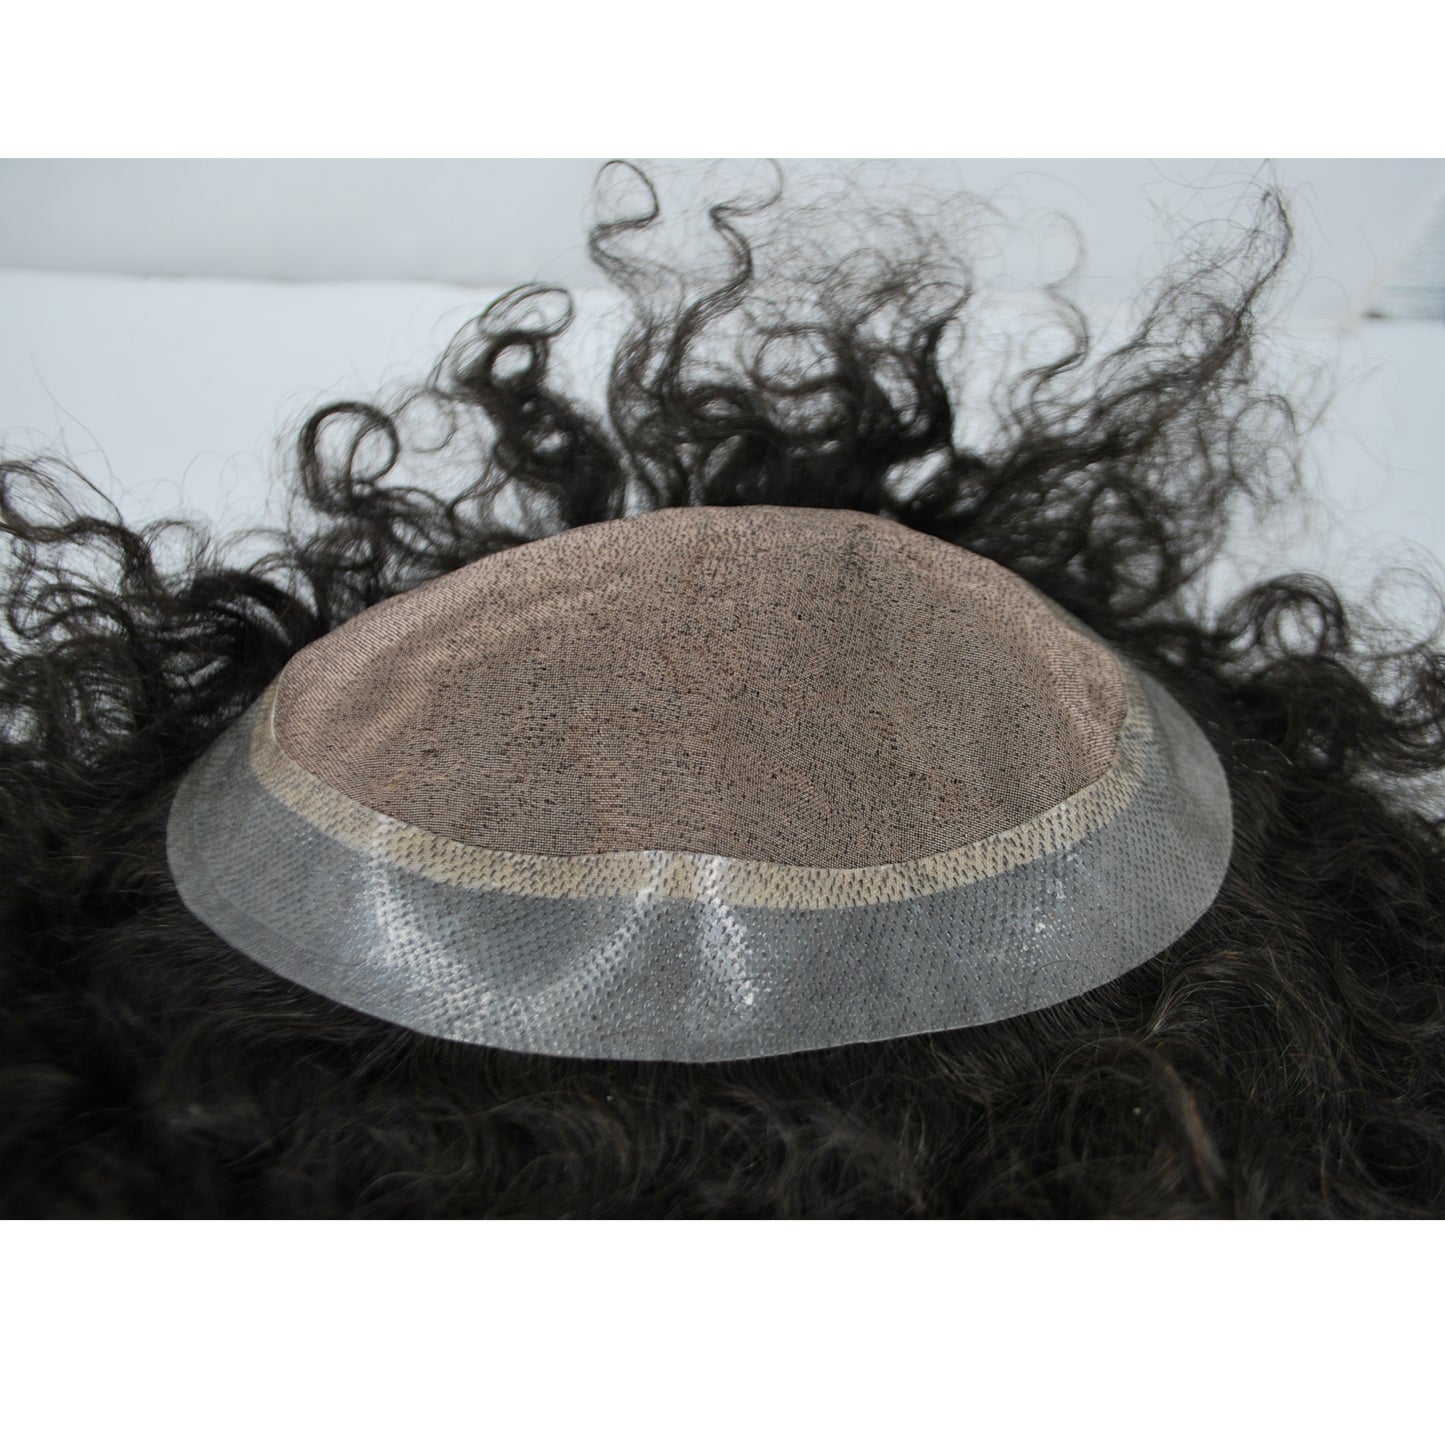 Clearance toupee hair piece for men mono with PU around curly hair system natural black hair